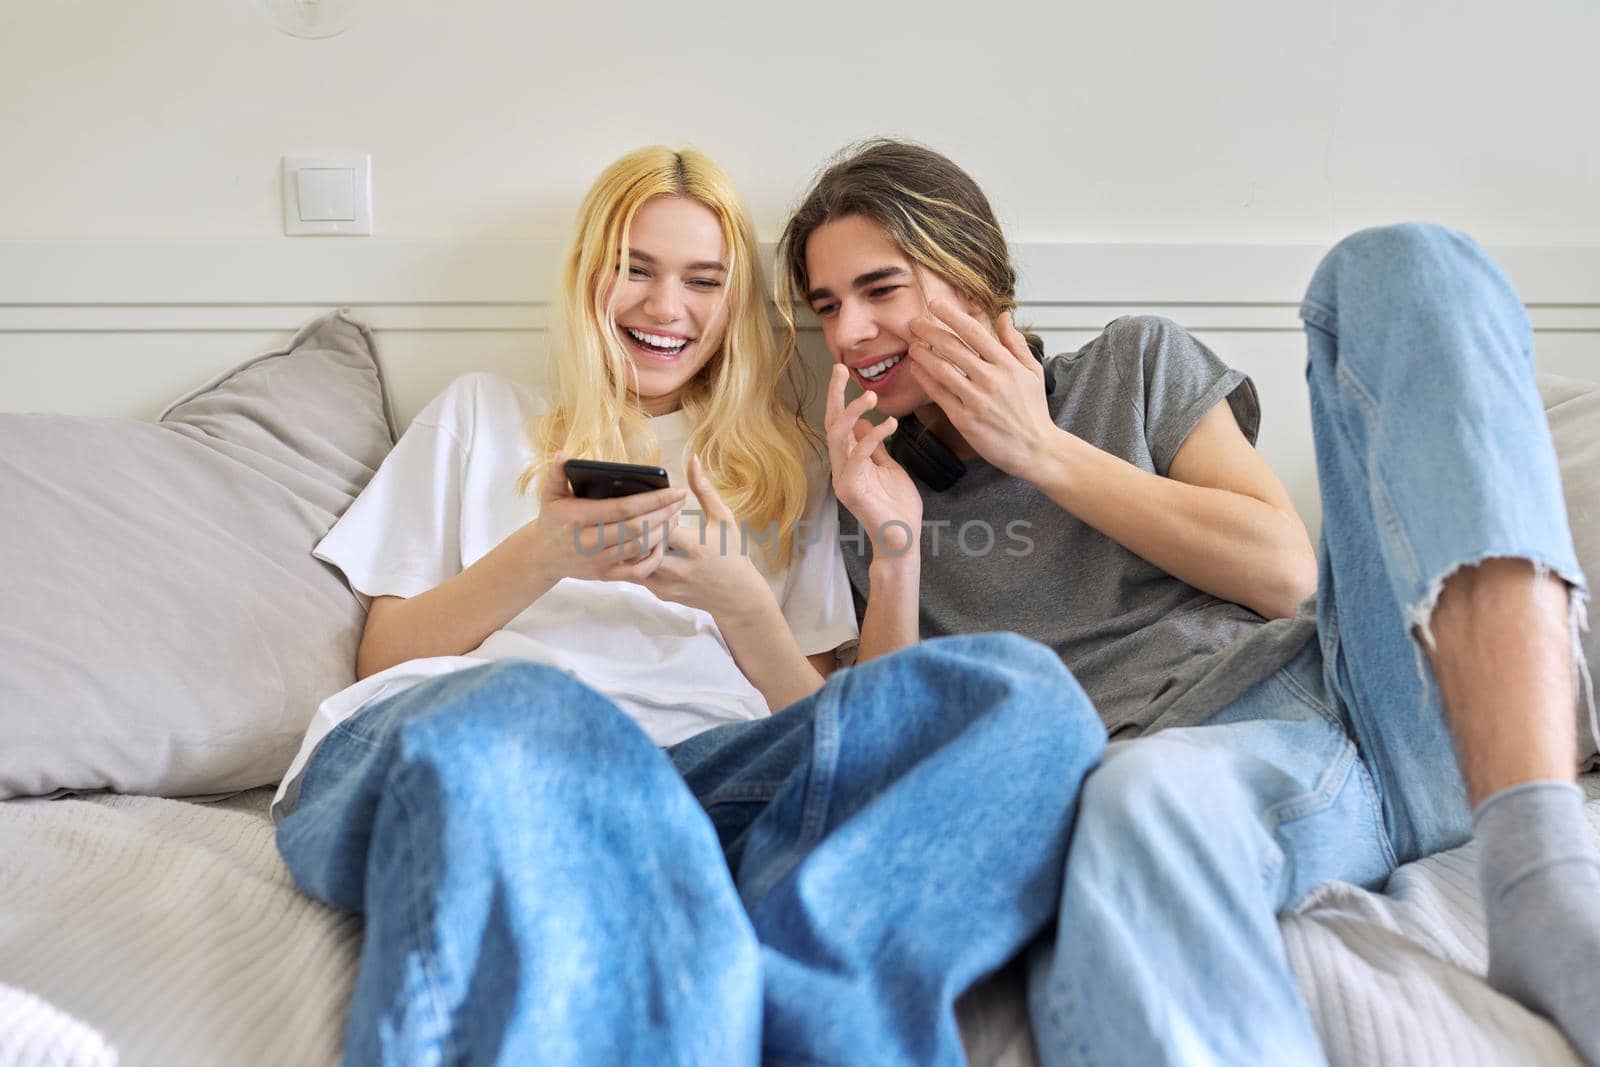 Couple of teenagers having fun together, sitting on the couch looking into the smartphone by VH-studio